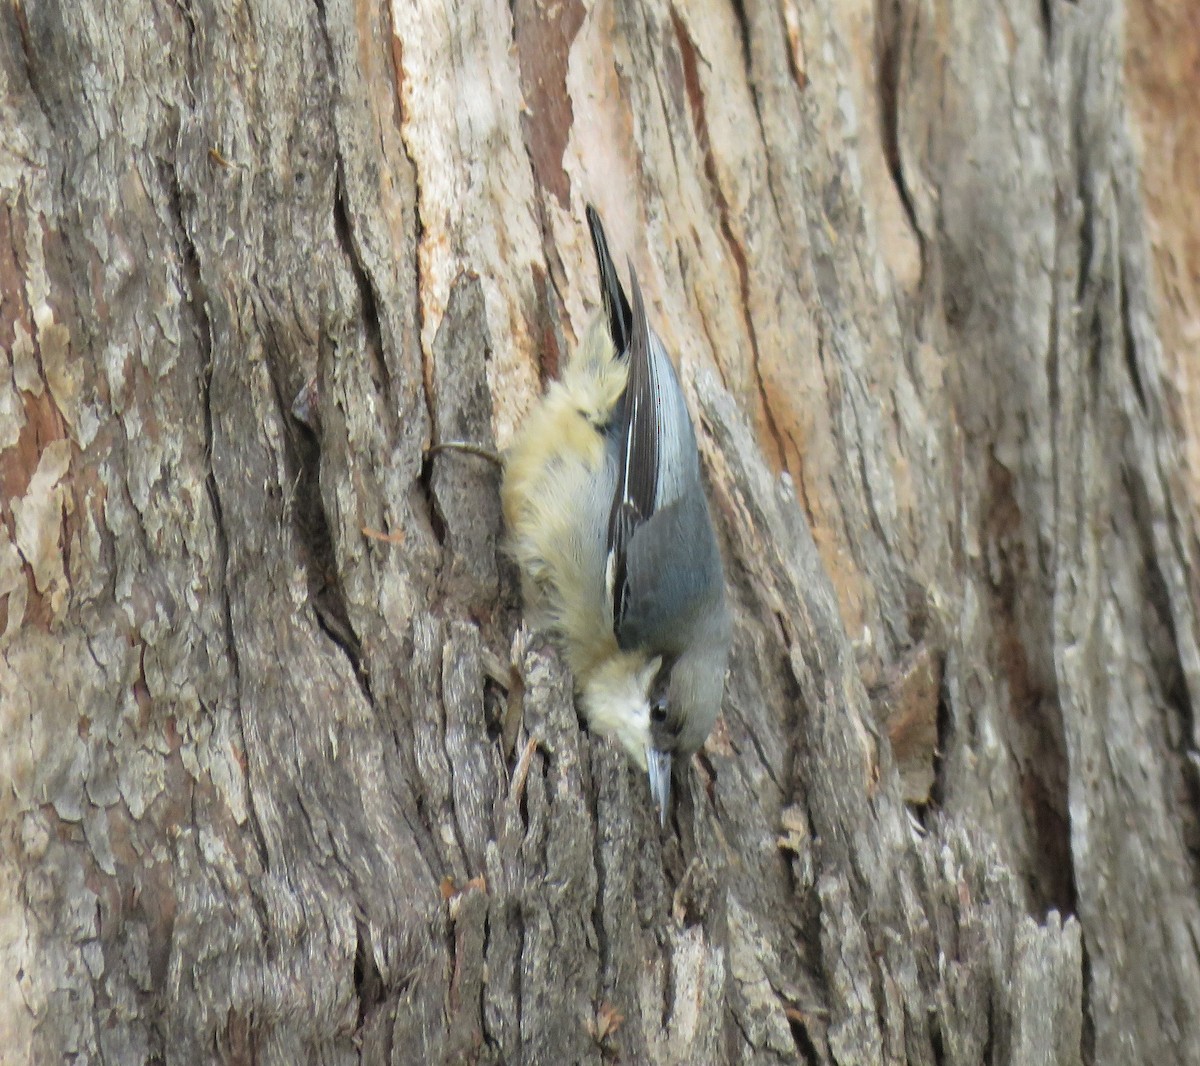 Pygmy Nuthatch - Chris O'Connell